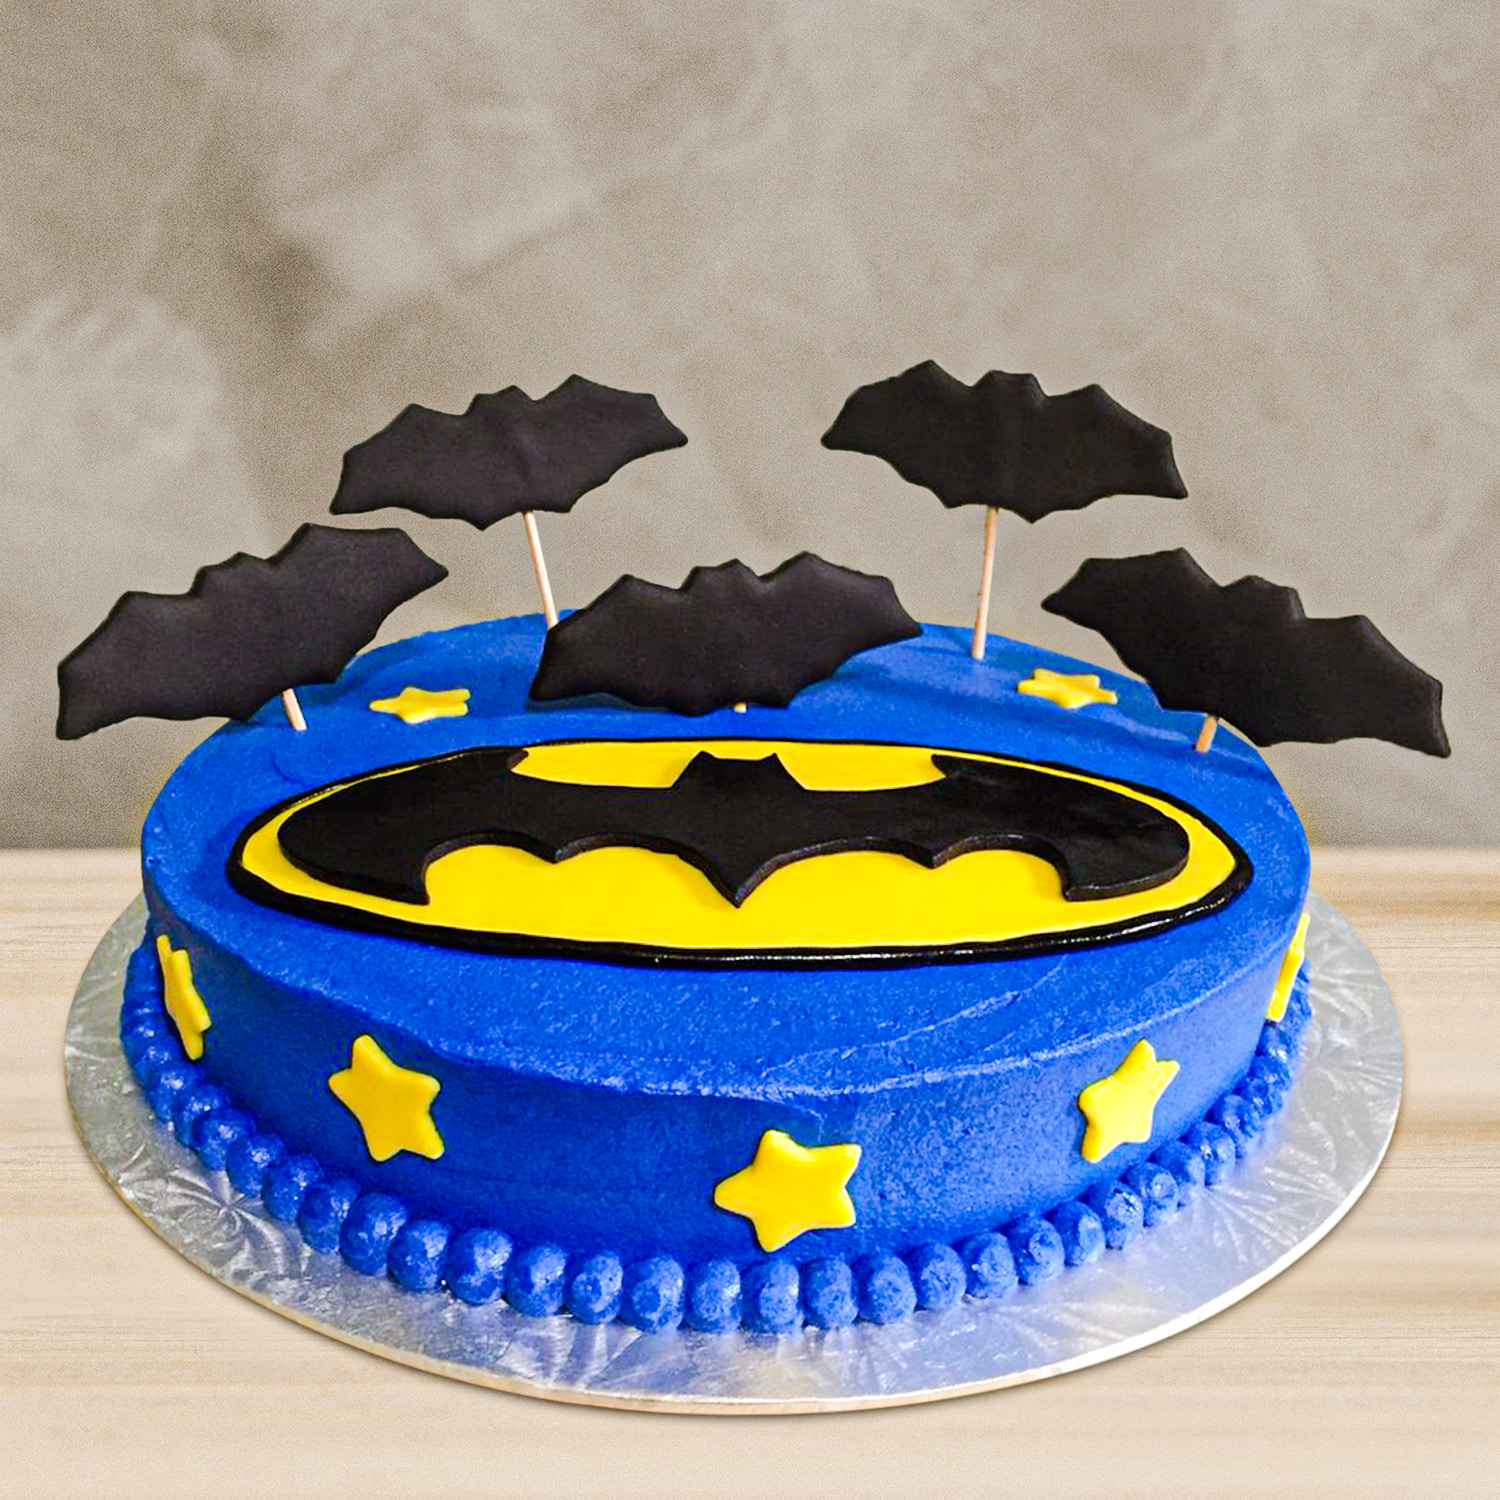 Batman Cake with Buttercream Frosting and Chocolate Stencil Cutout